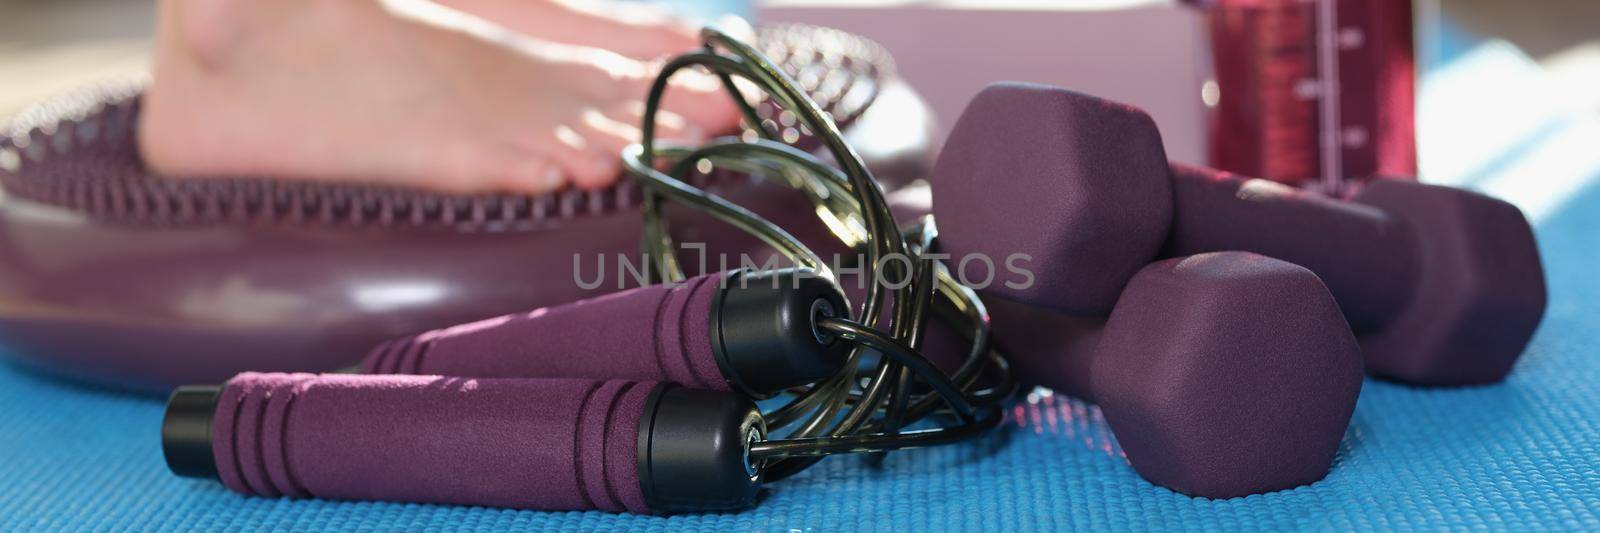 A man at home stands on a massage mat, legs close-up. Sports equipment for exercise, dumbbells and skipping rope